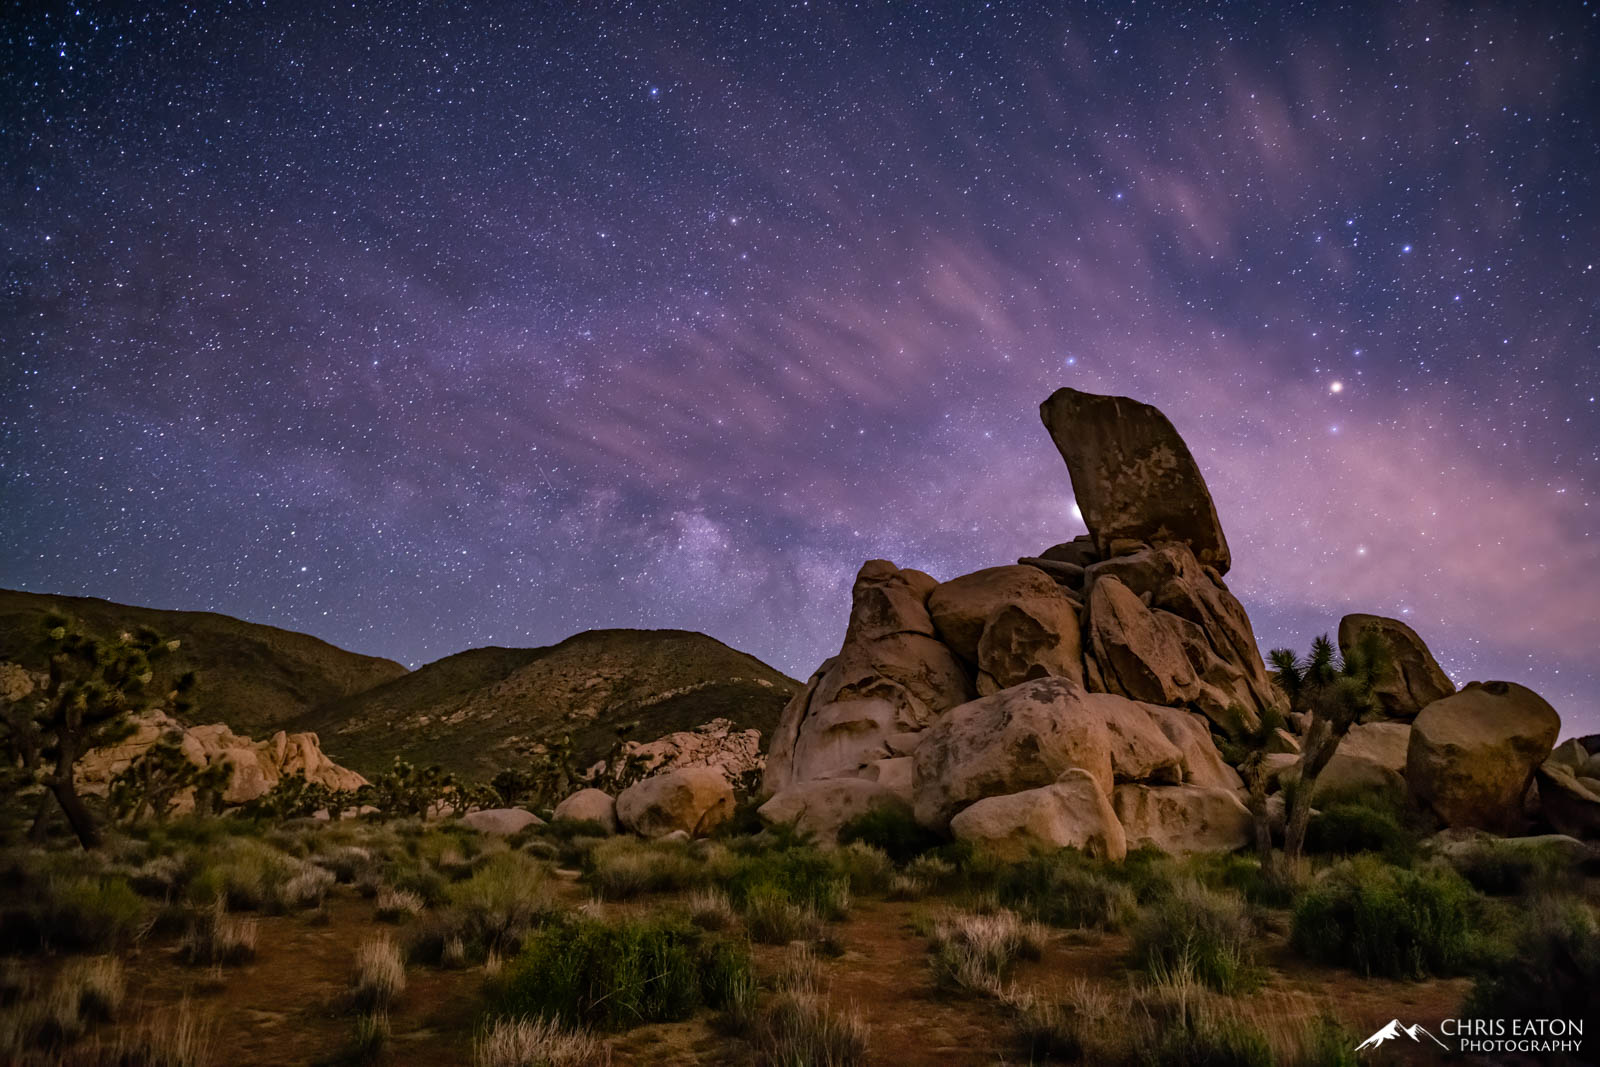 Tombstone Rock, in Joshua Tree National Park, sits atop a pile of monzogranite boulders.